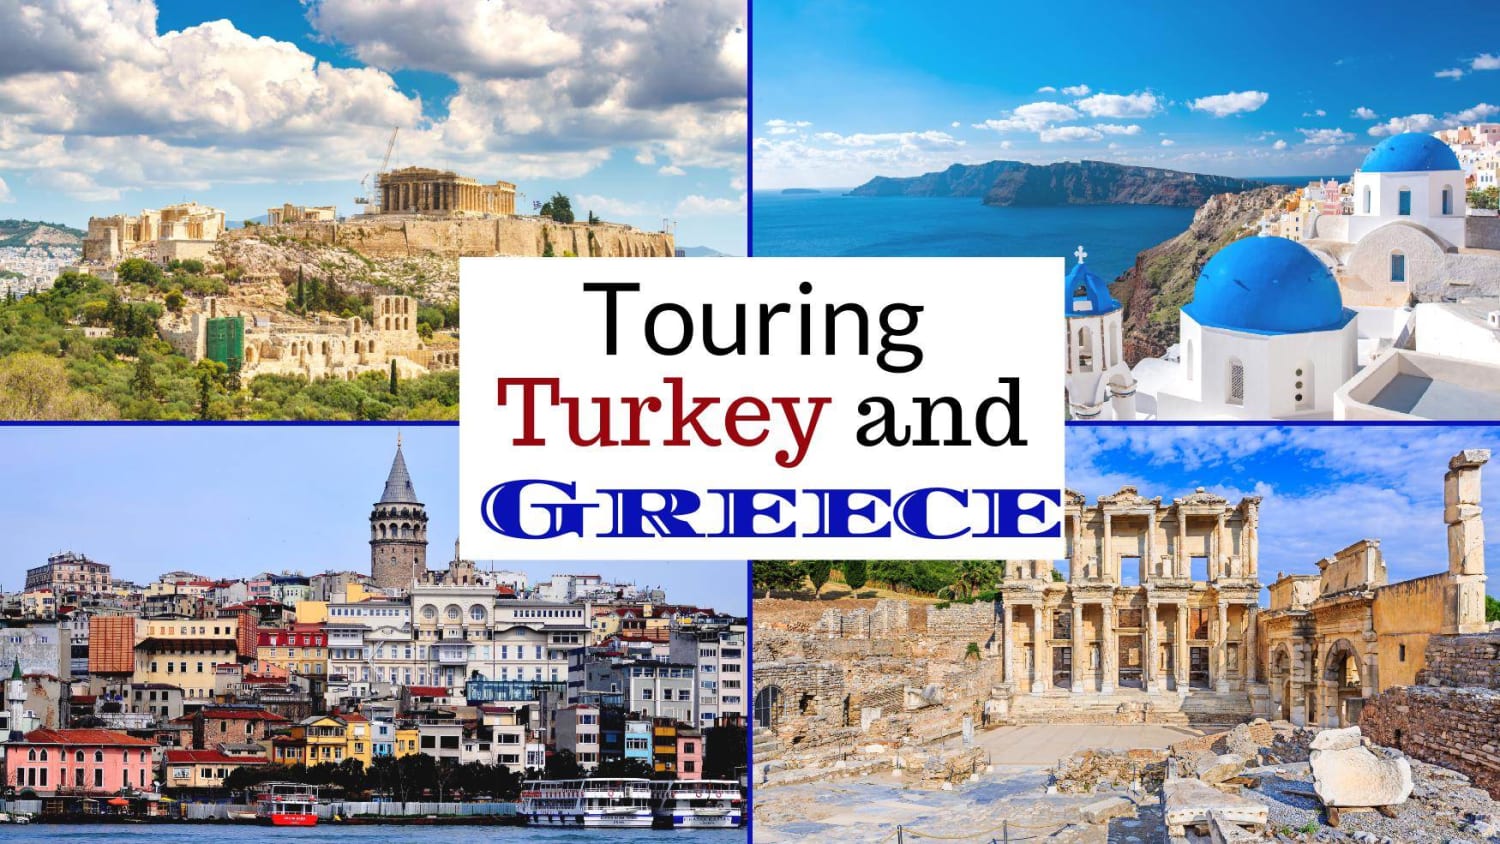 Touring Greece and Turkey - visit the remarkable cradle of civilisation